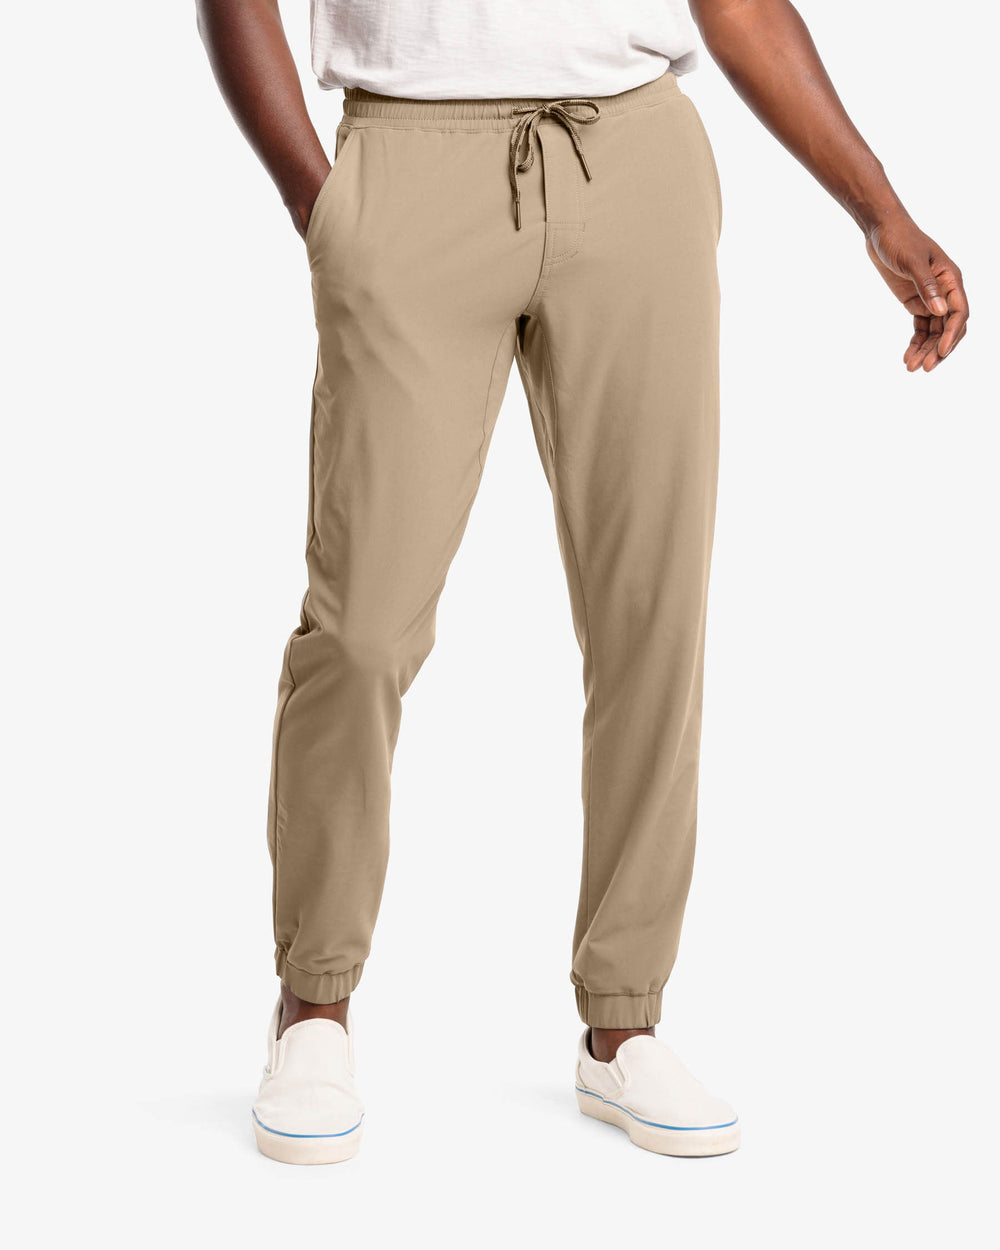 The front view of the Southern Tide The Excursion Performance Jogger by Southern Tide - Sandstone Khaki